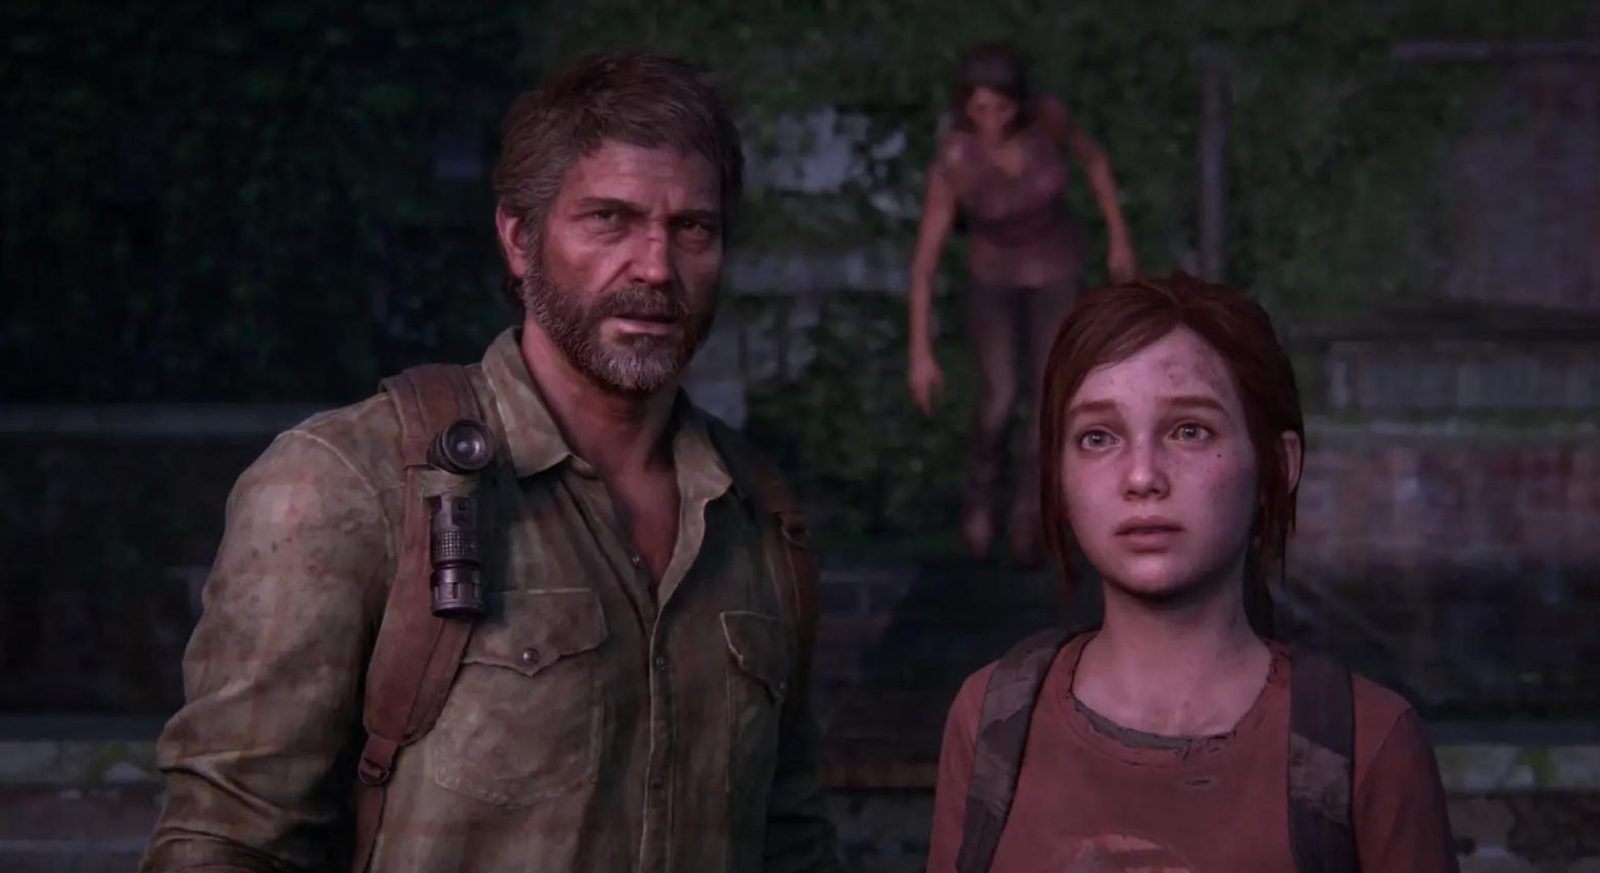 Will There Be 'The Last of Us' Part 3?